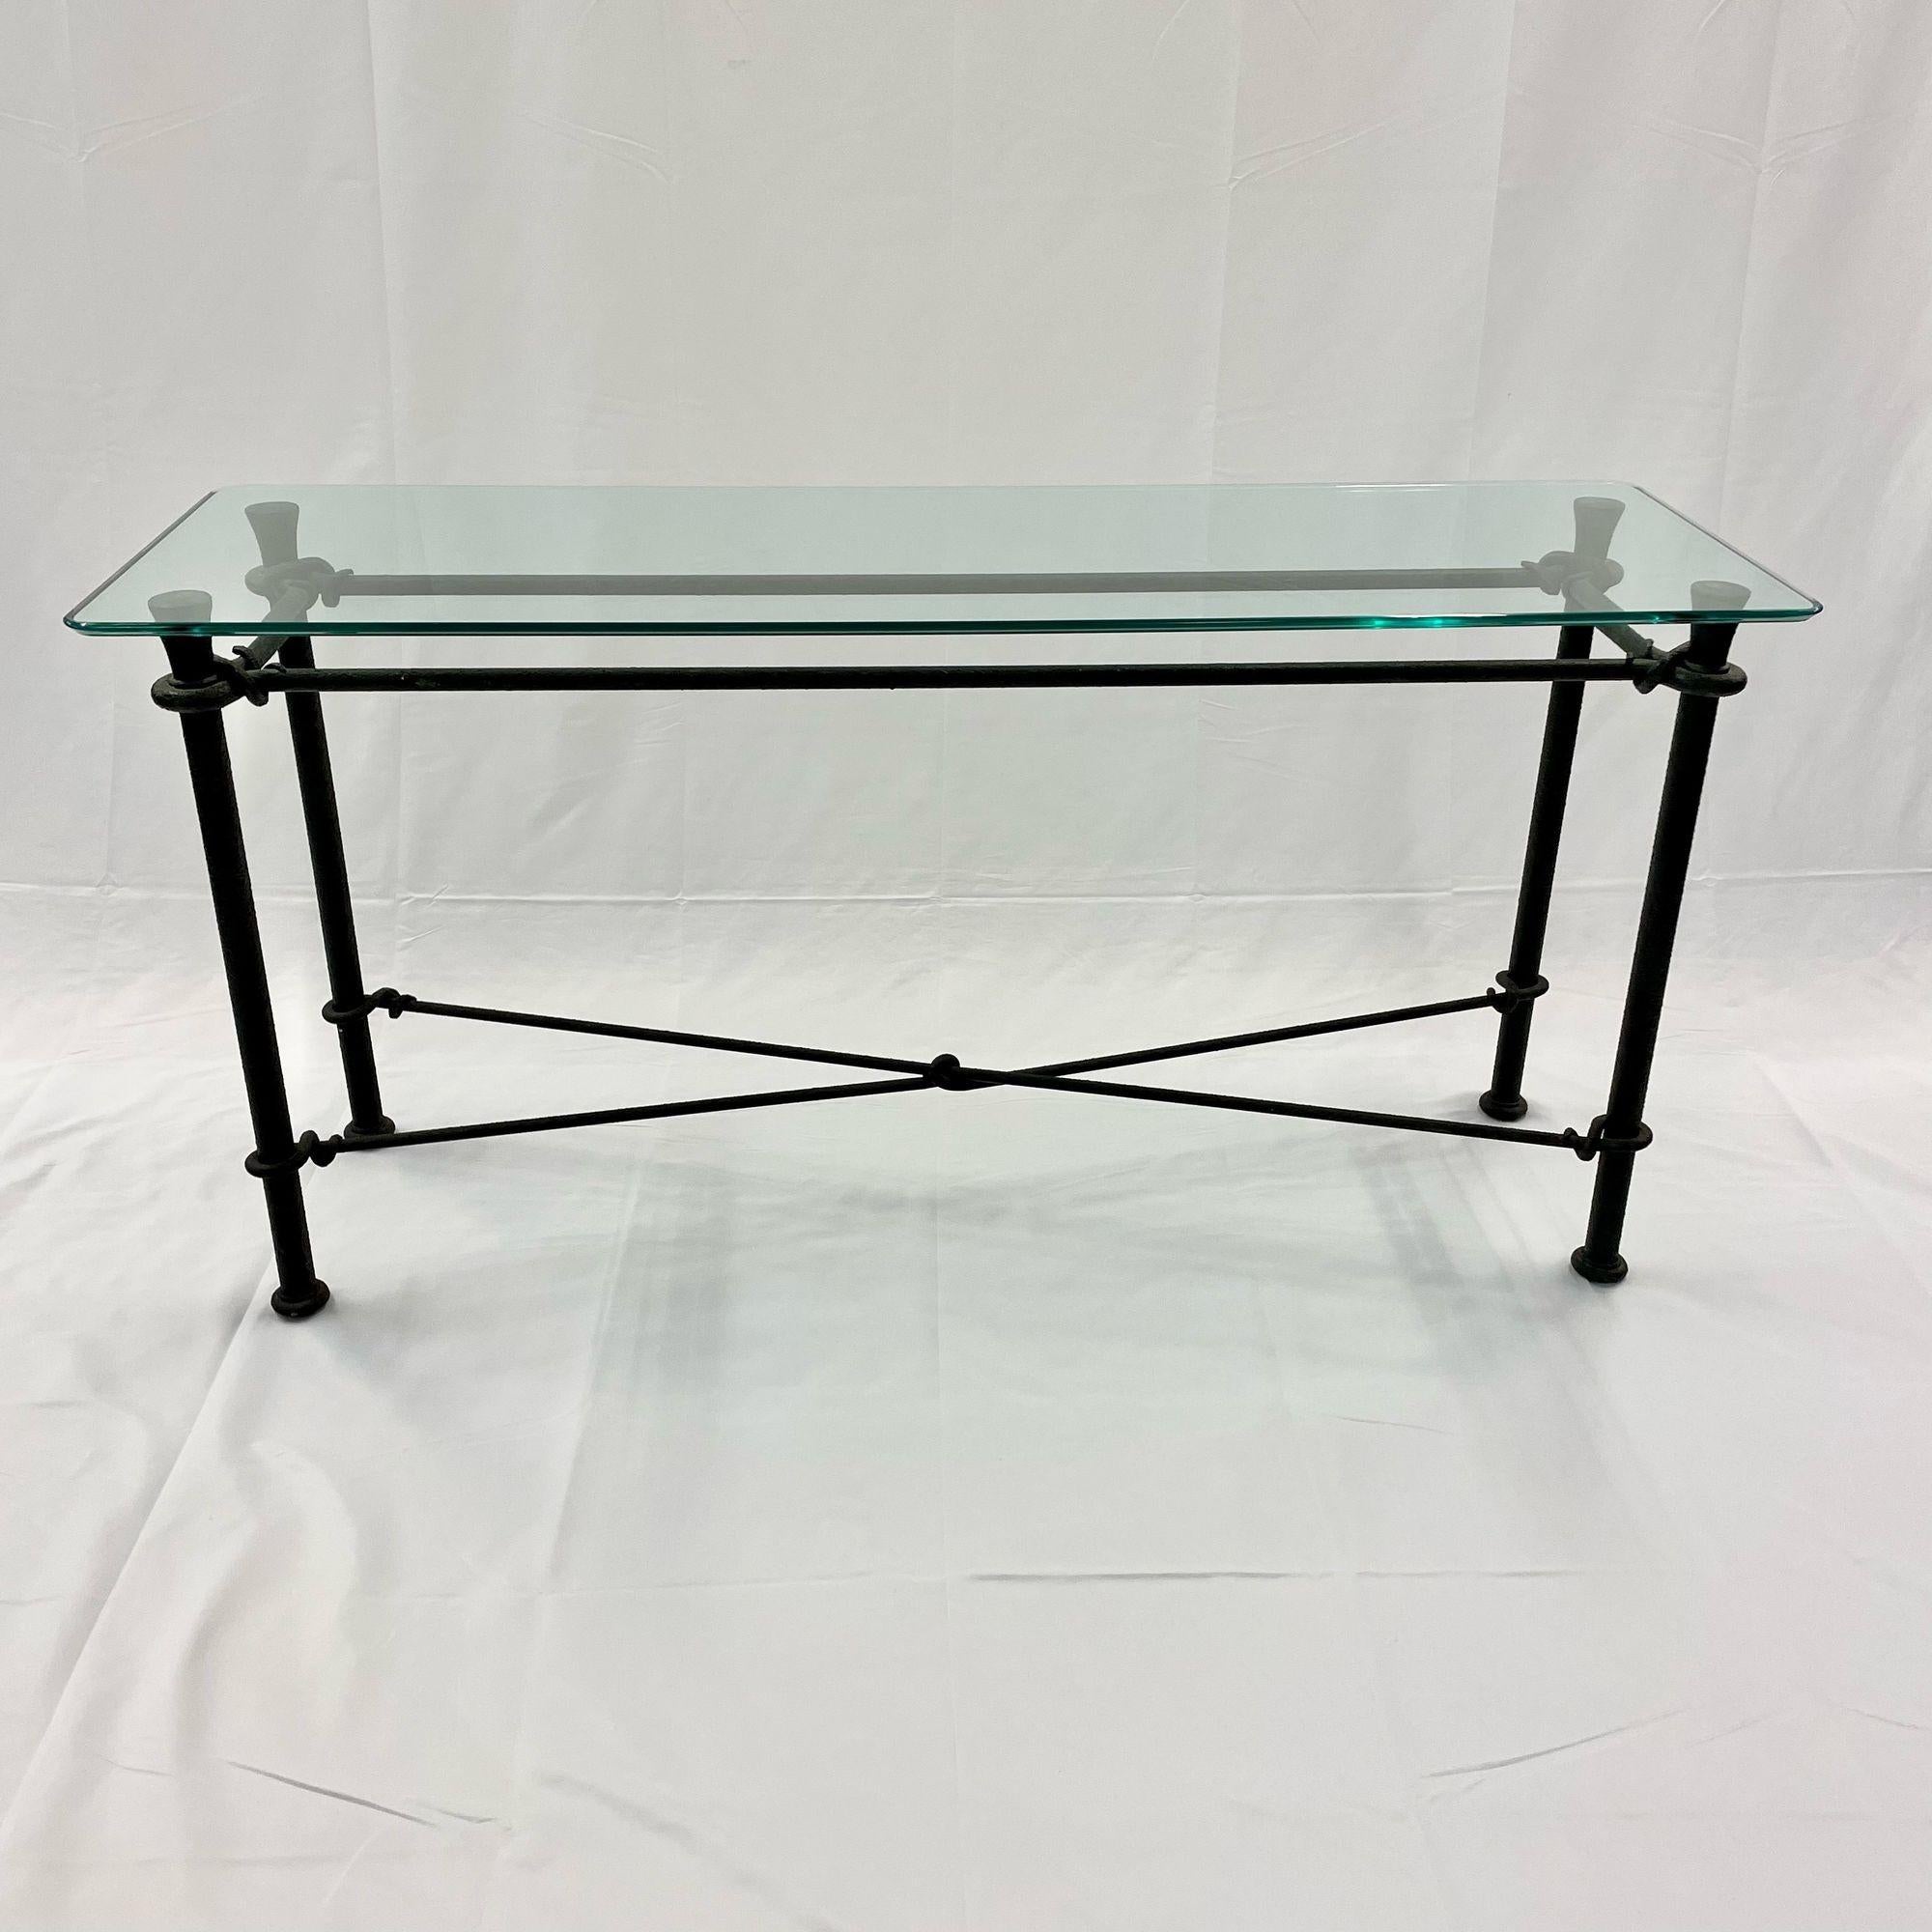 American Mid-Century Modern Giacometti Style Console / Sofa Table, Wrought Iron Glass Top